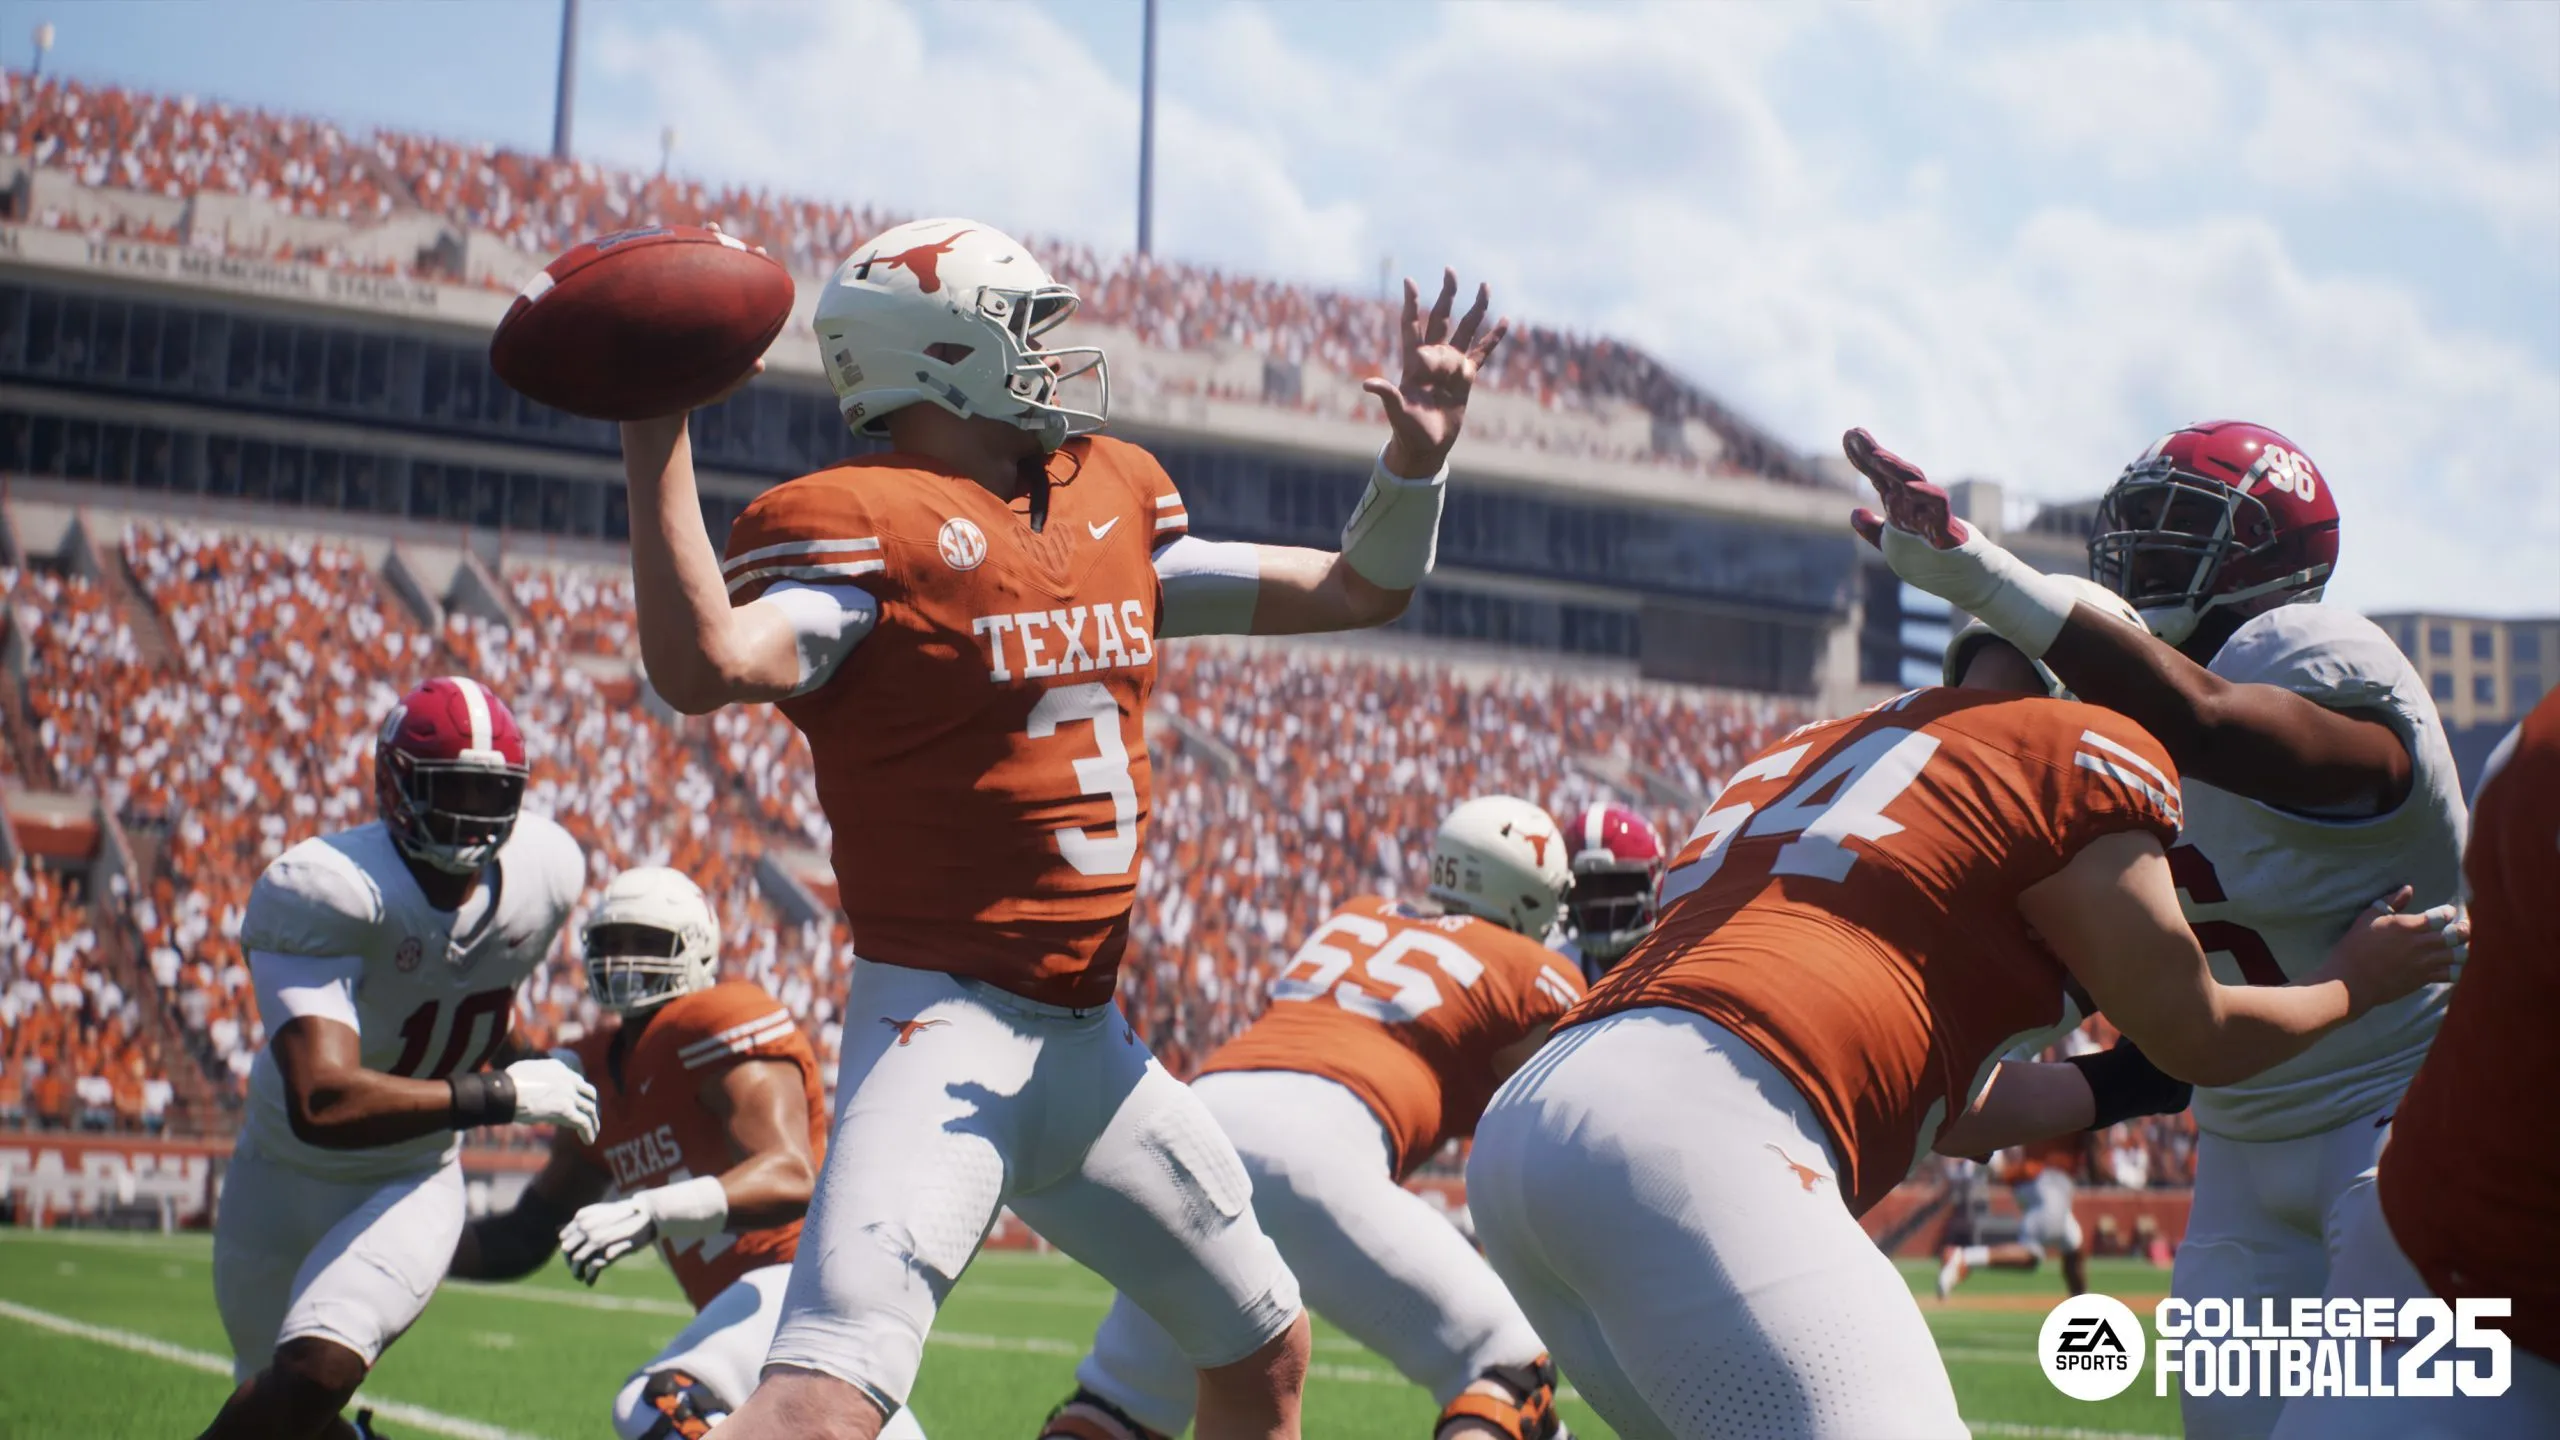 Alabama playing Texas in College Football 25.